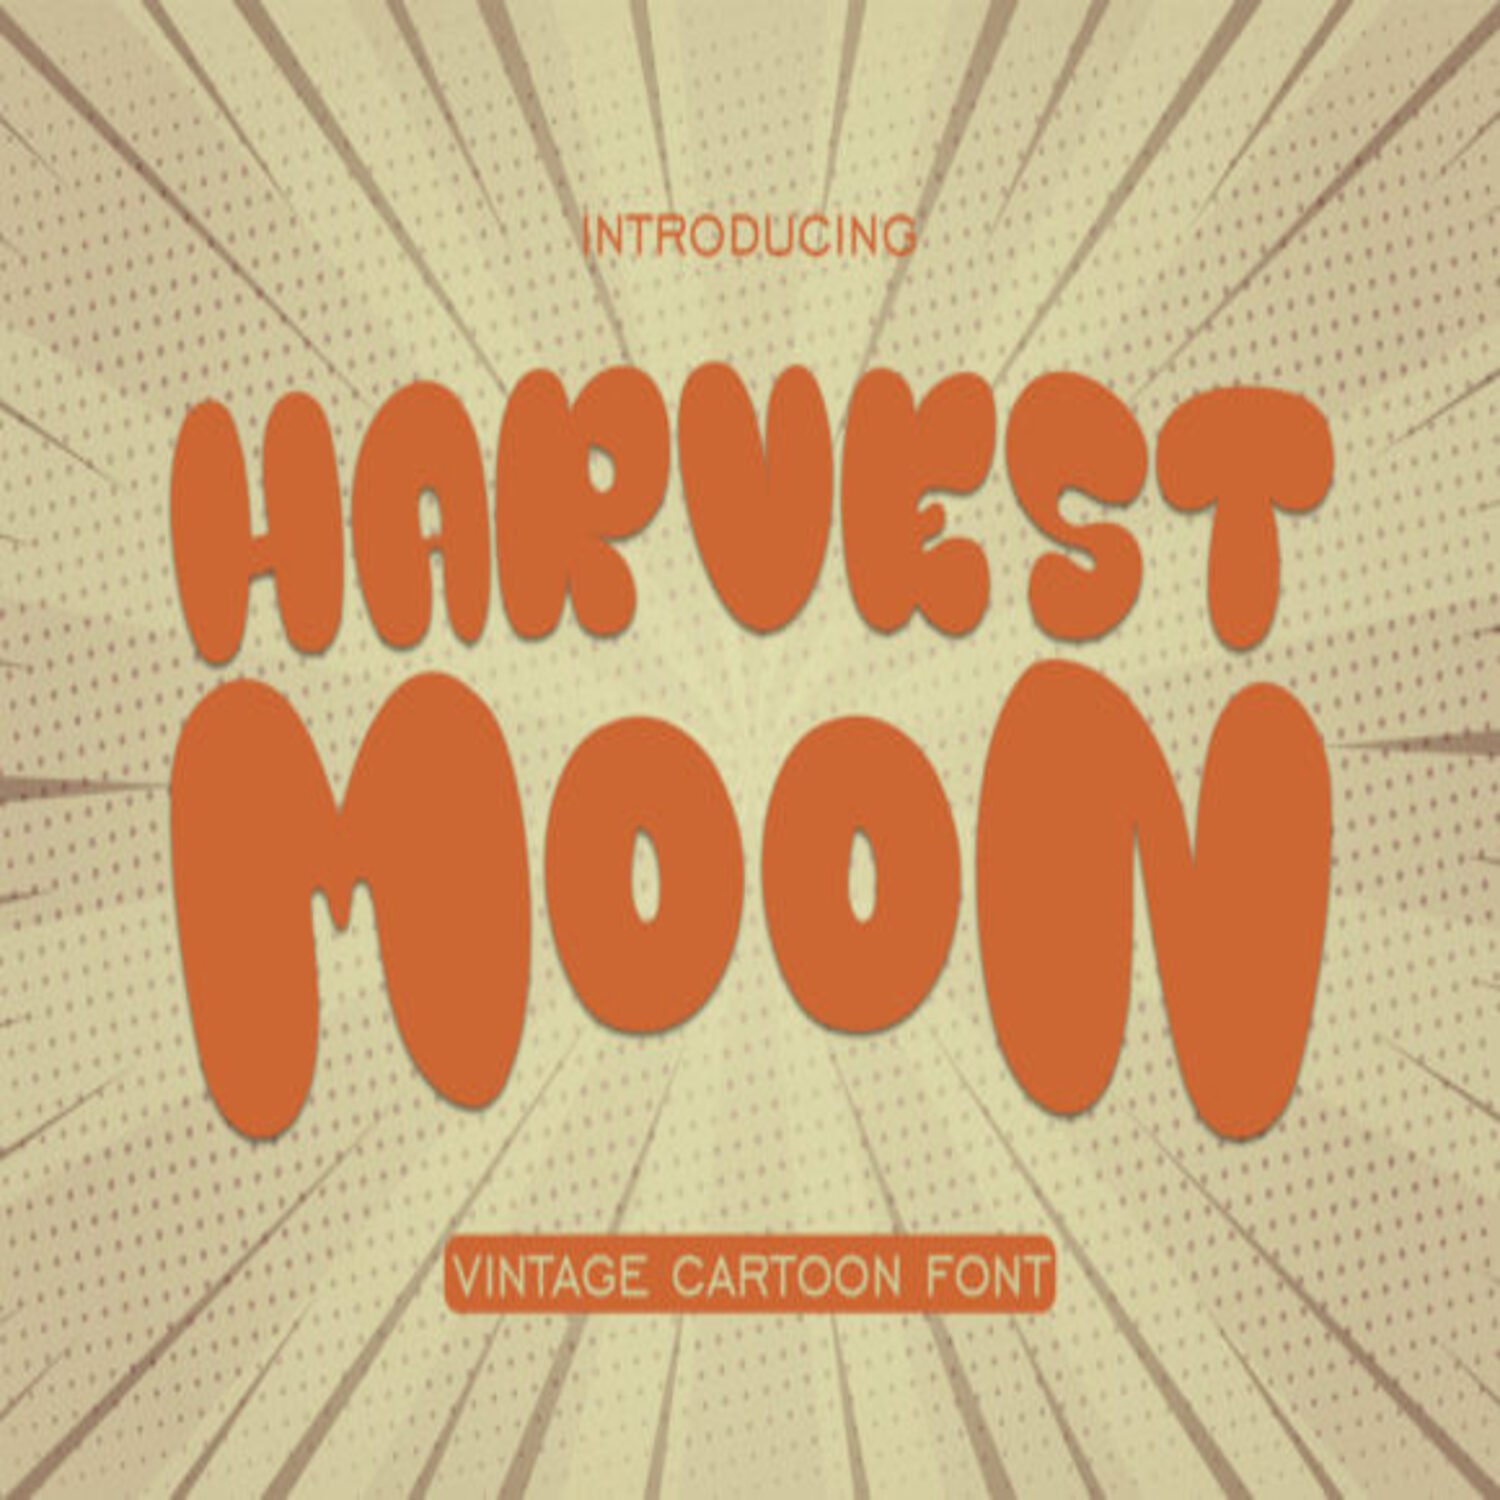 Harvest Moon Fonts main cover.